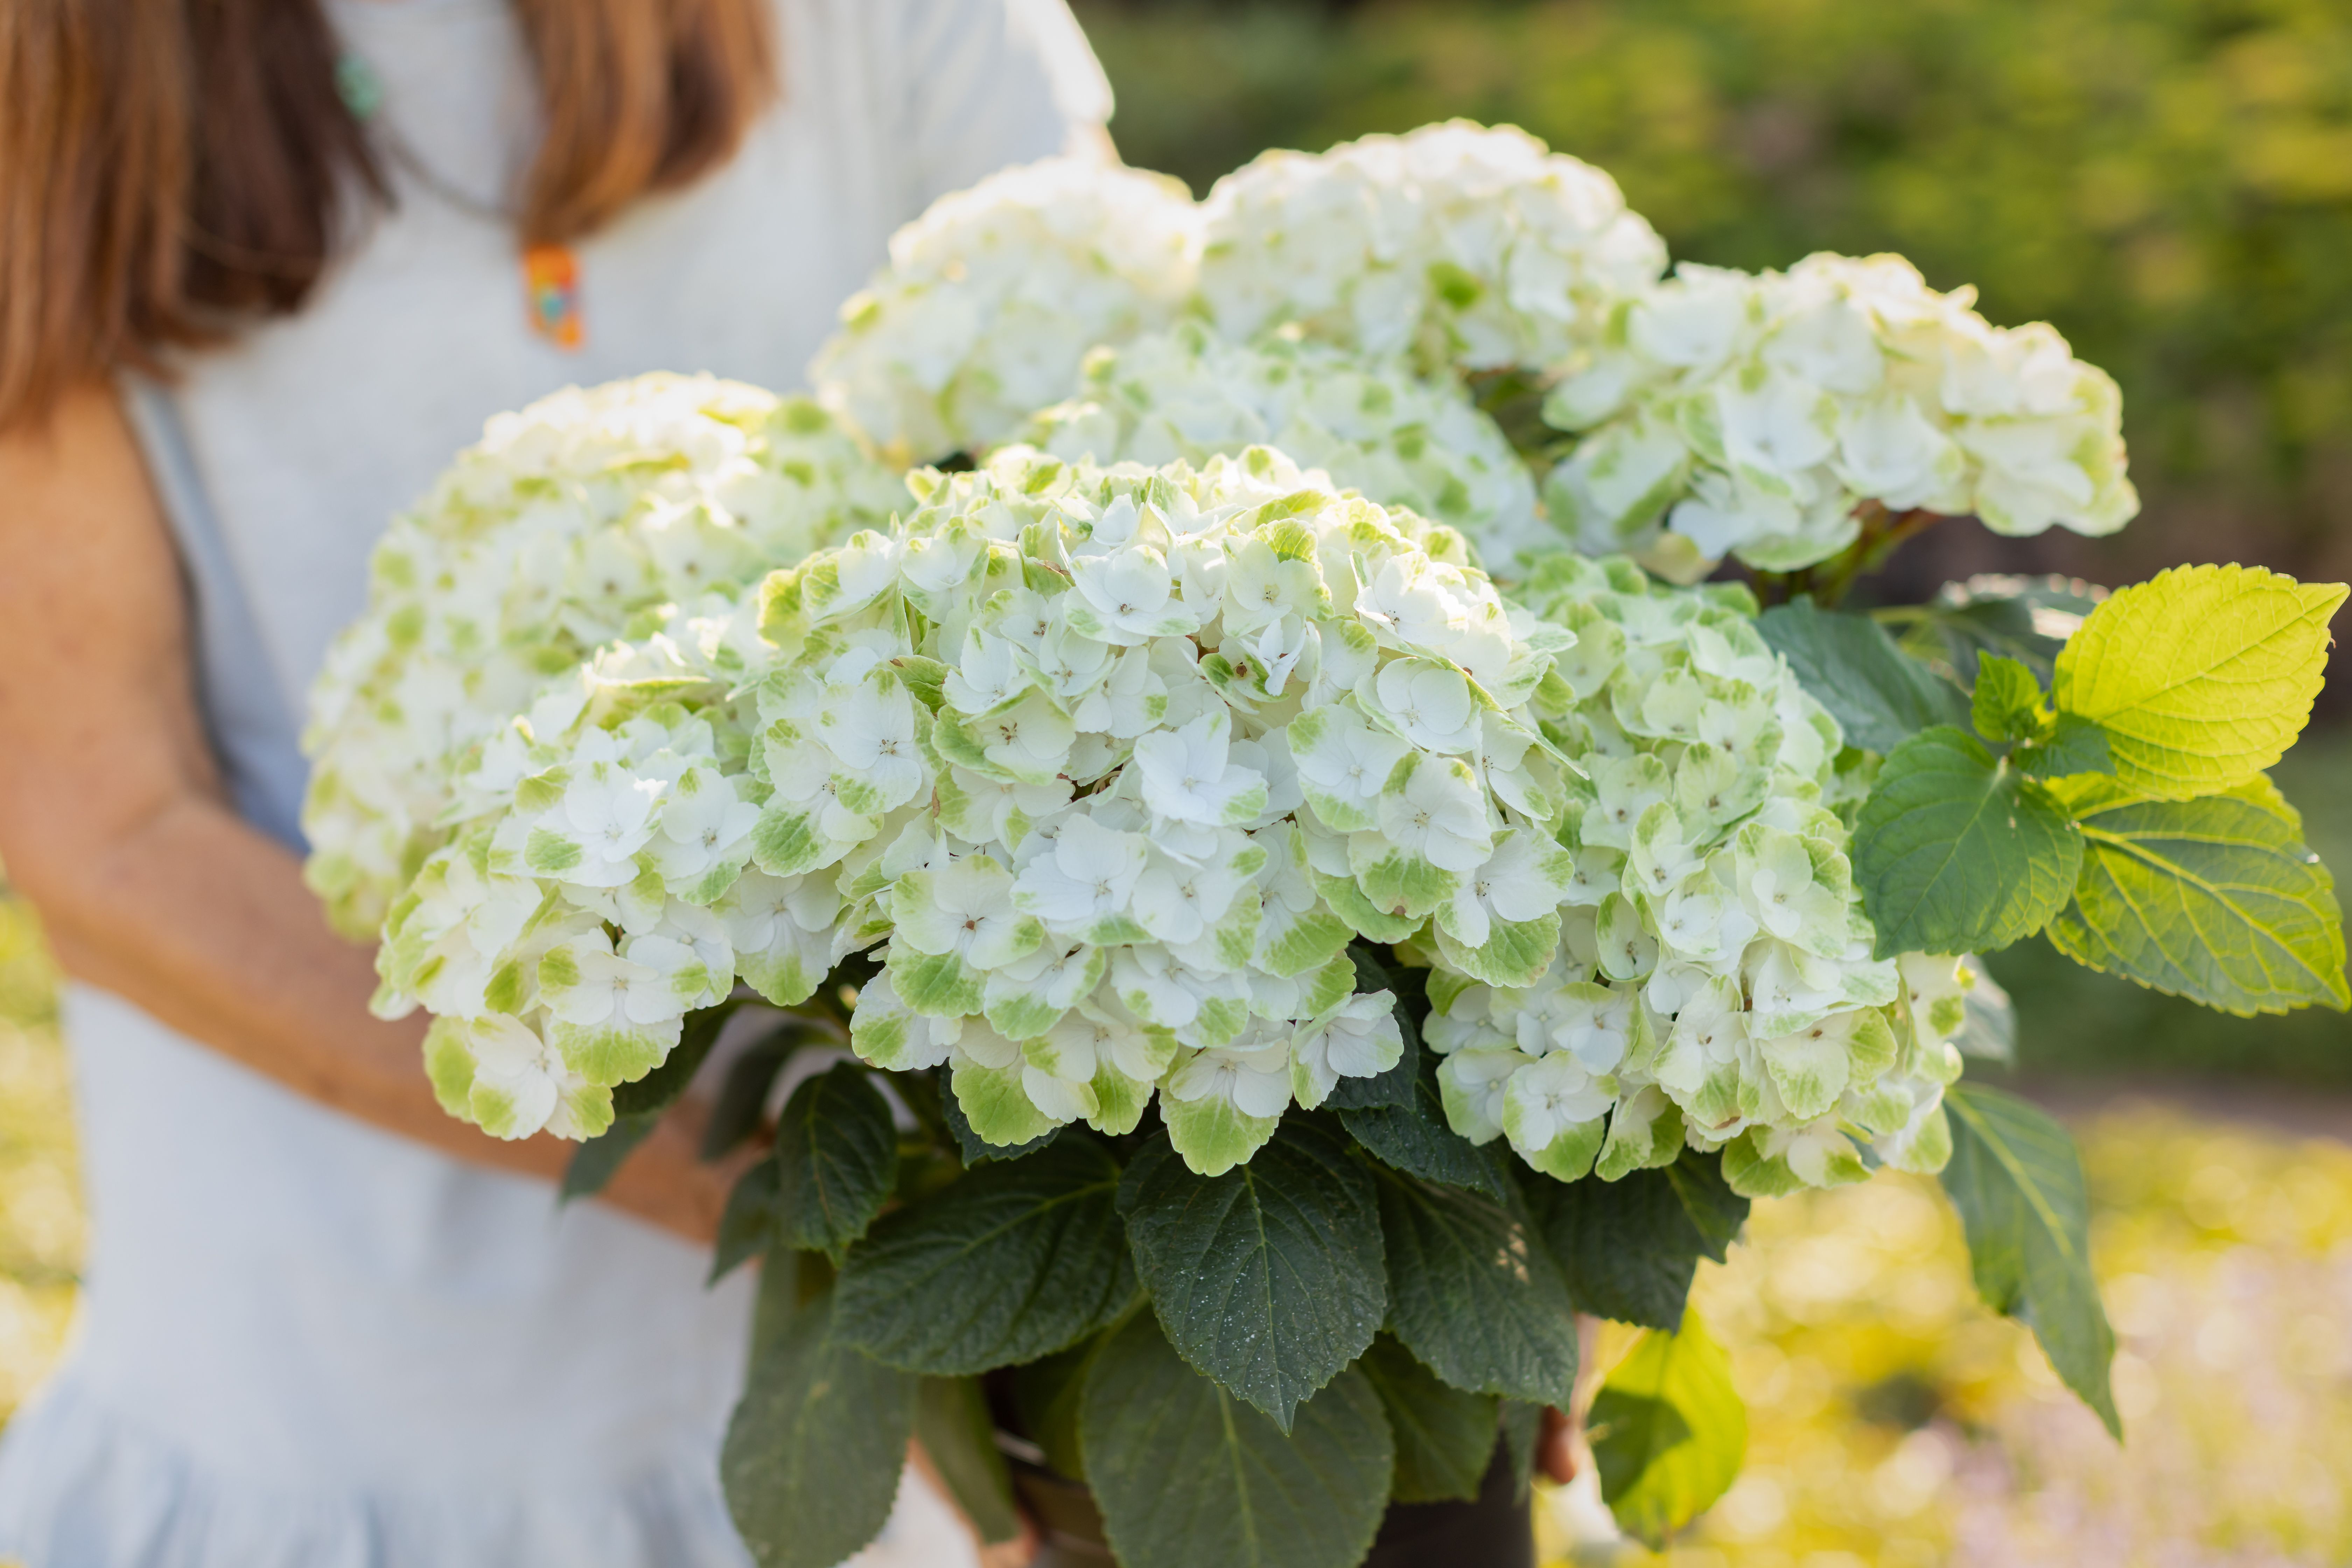 images/plants/hydrangea/hyd-magical-everlasting-noblesse/hyd-magical-everlasting-noblesse-0001.jpg